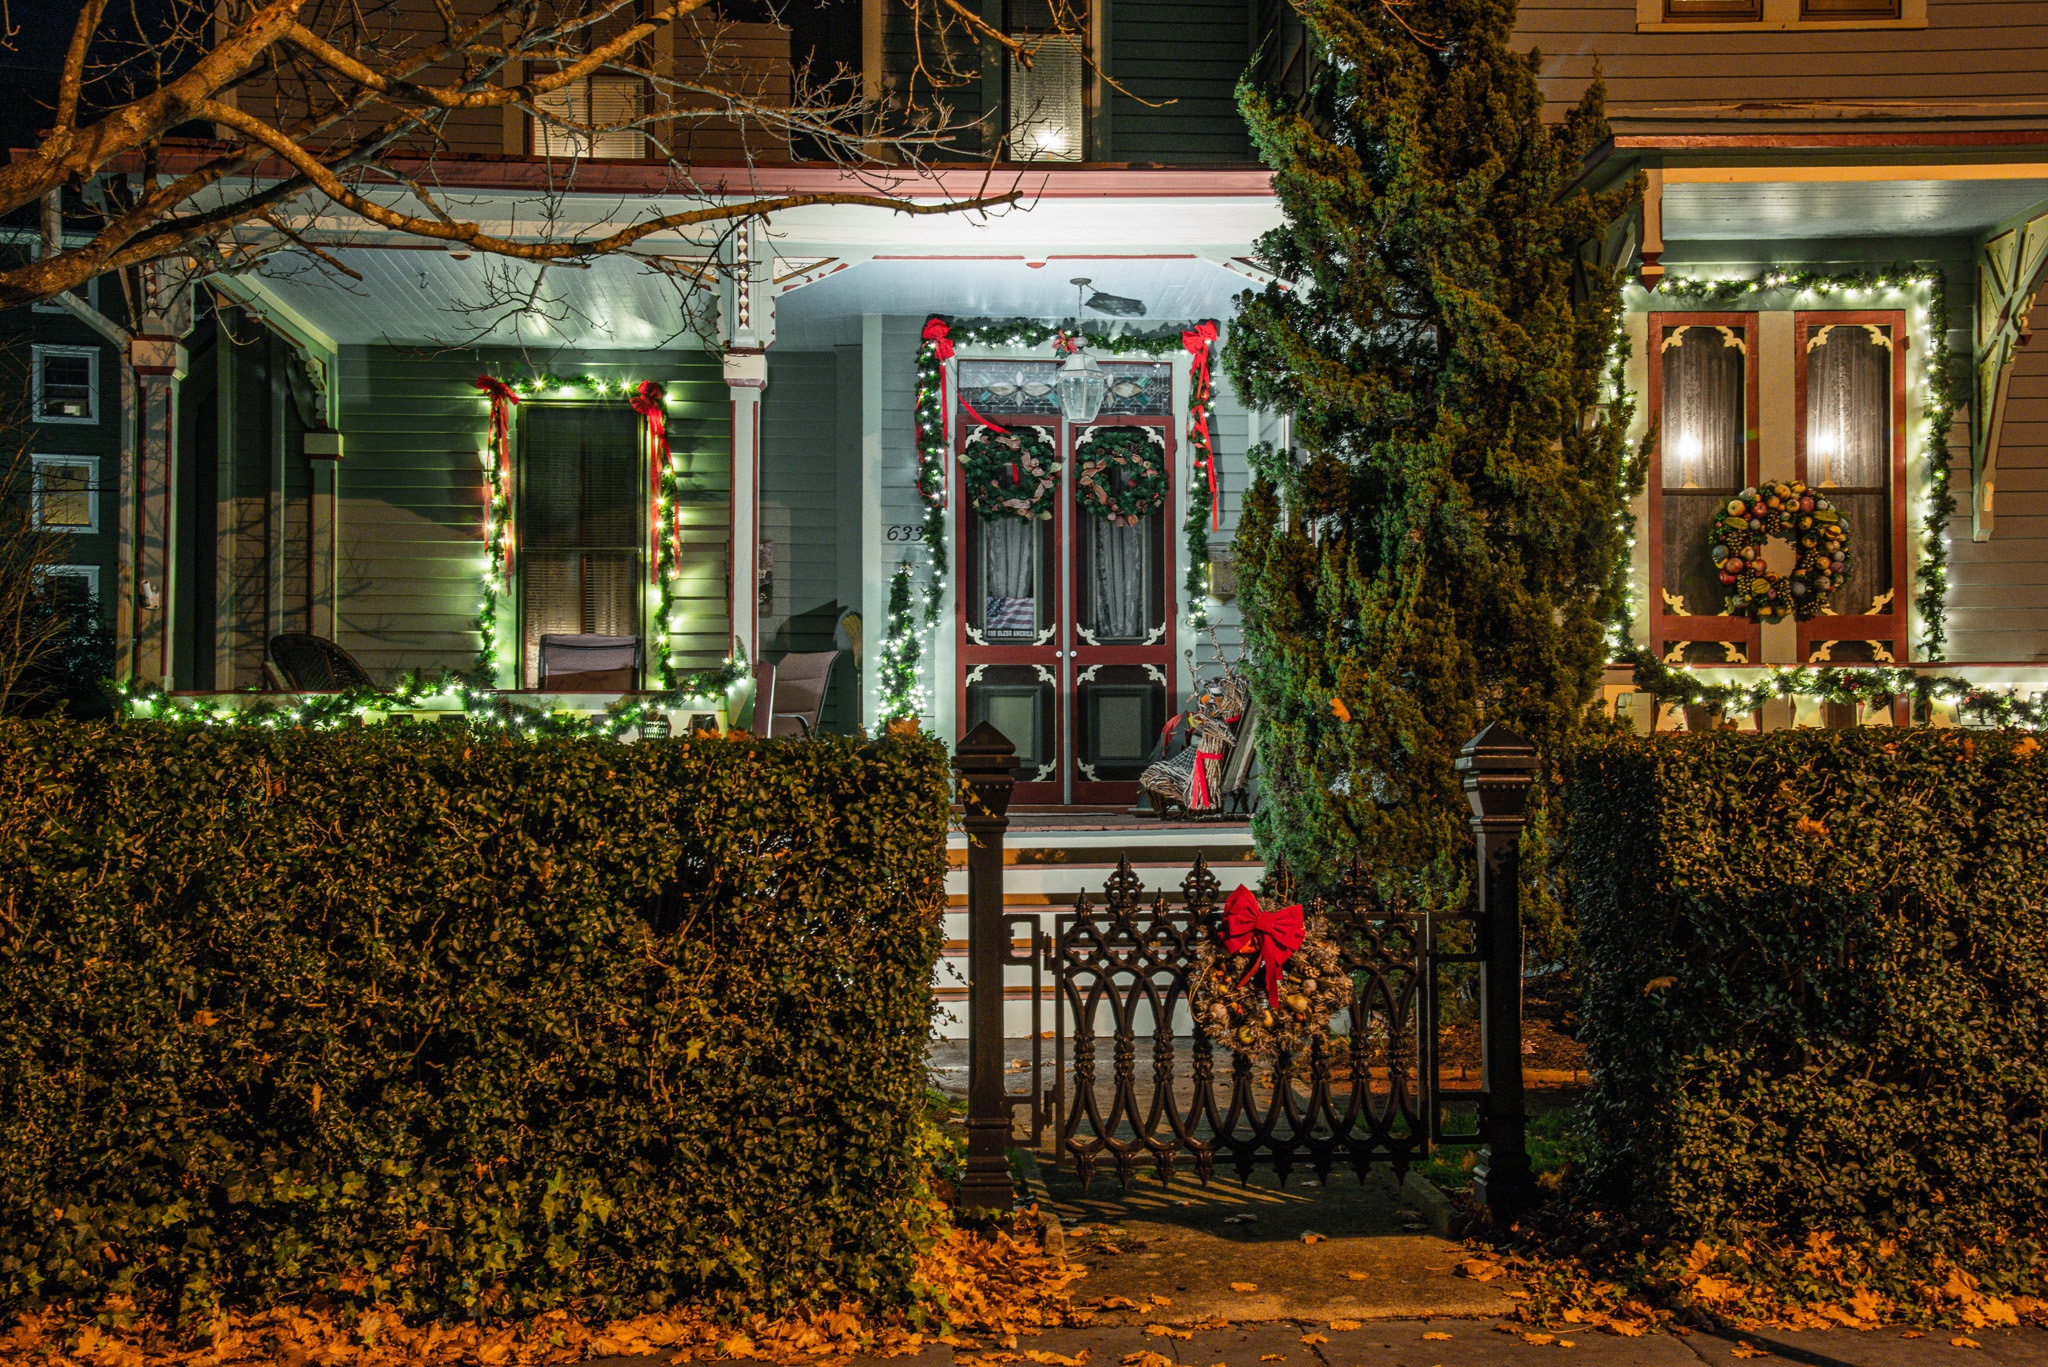 Hughes Street all decorated for the holidays